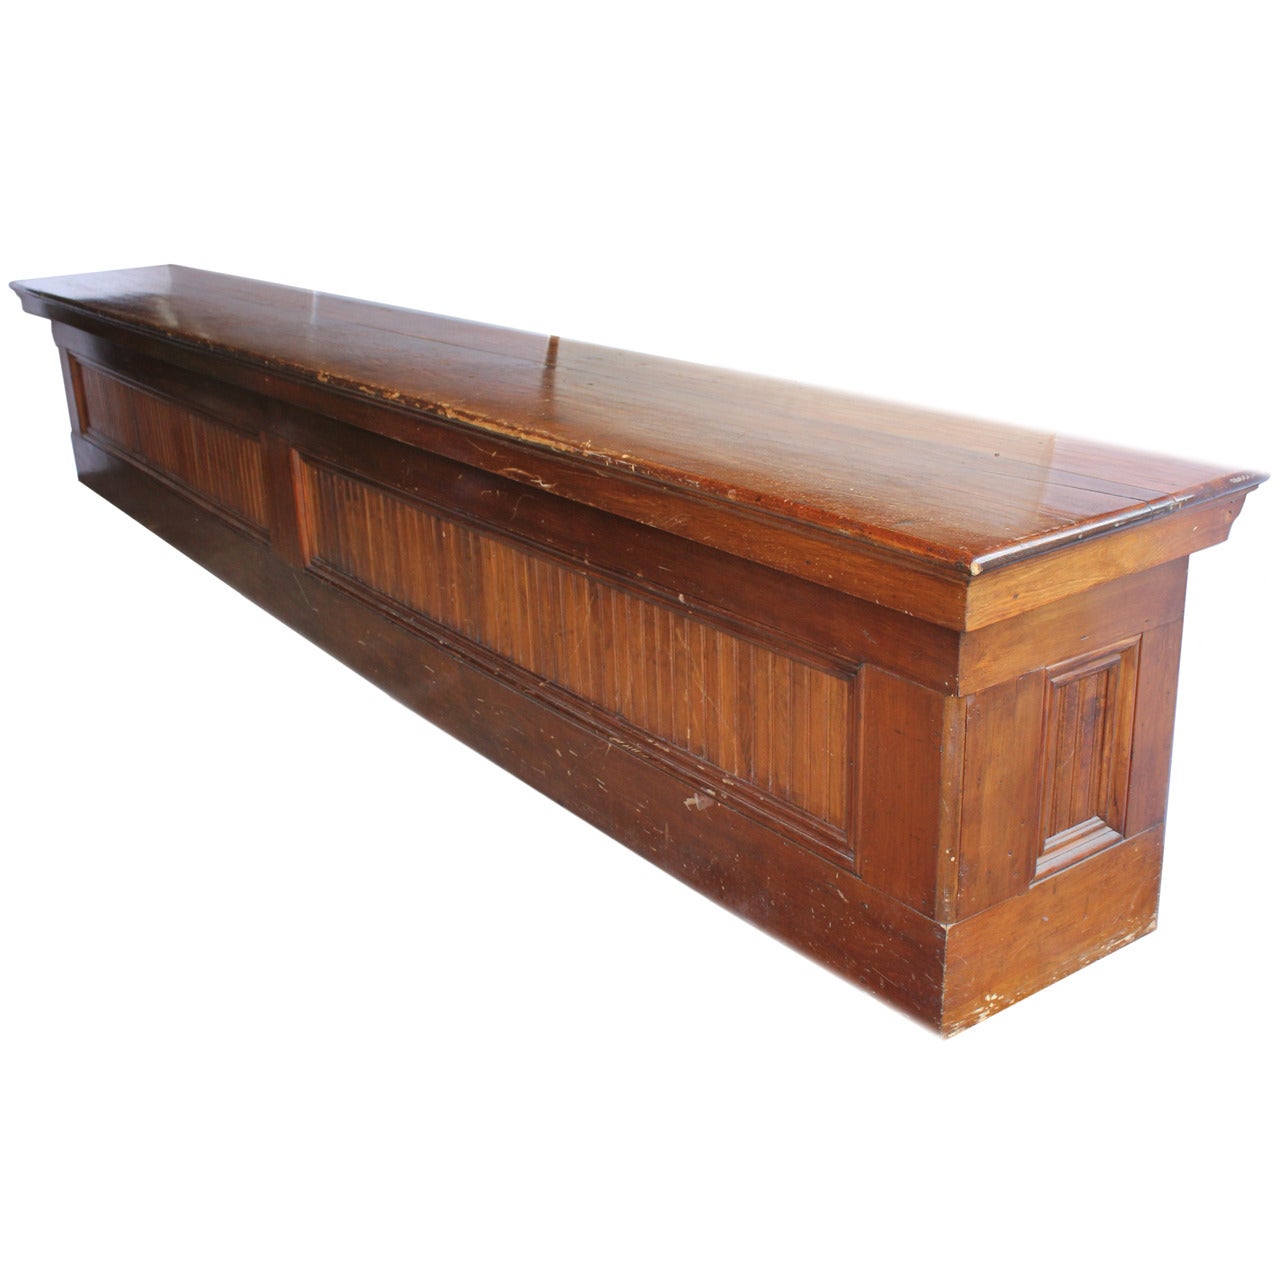 16 ft. Antique Store Wood Counter For Sale